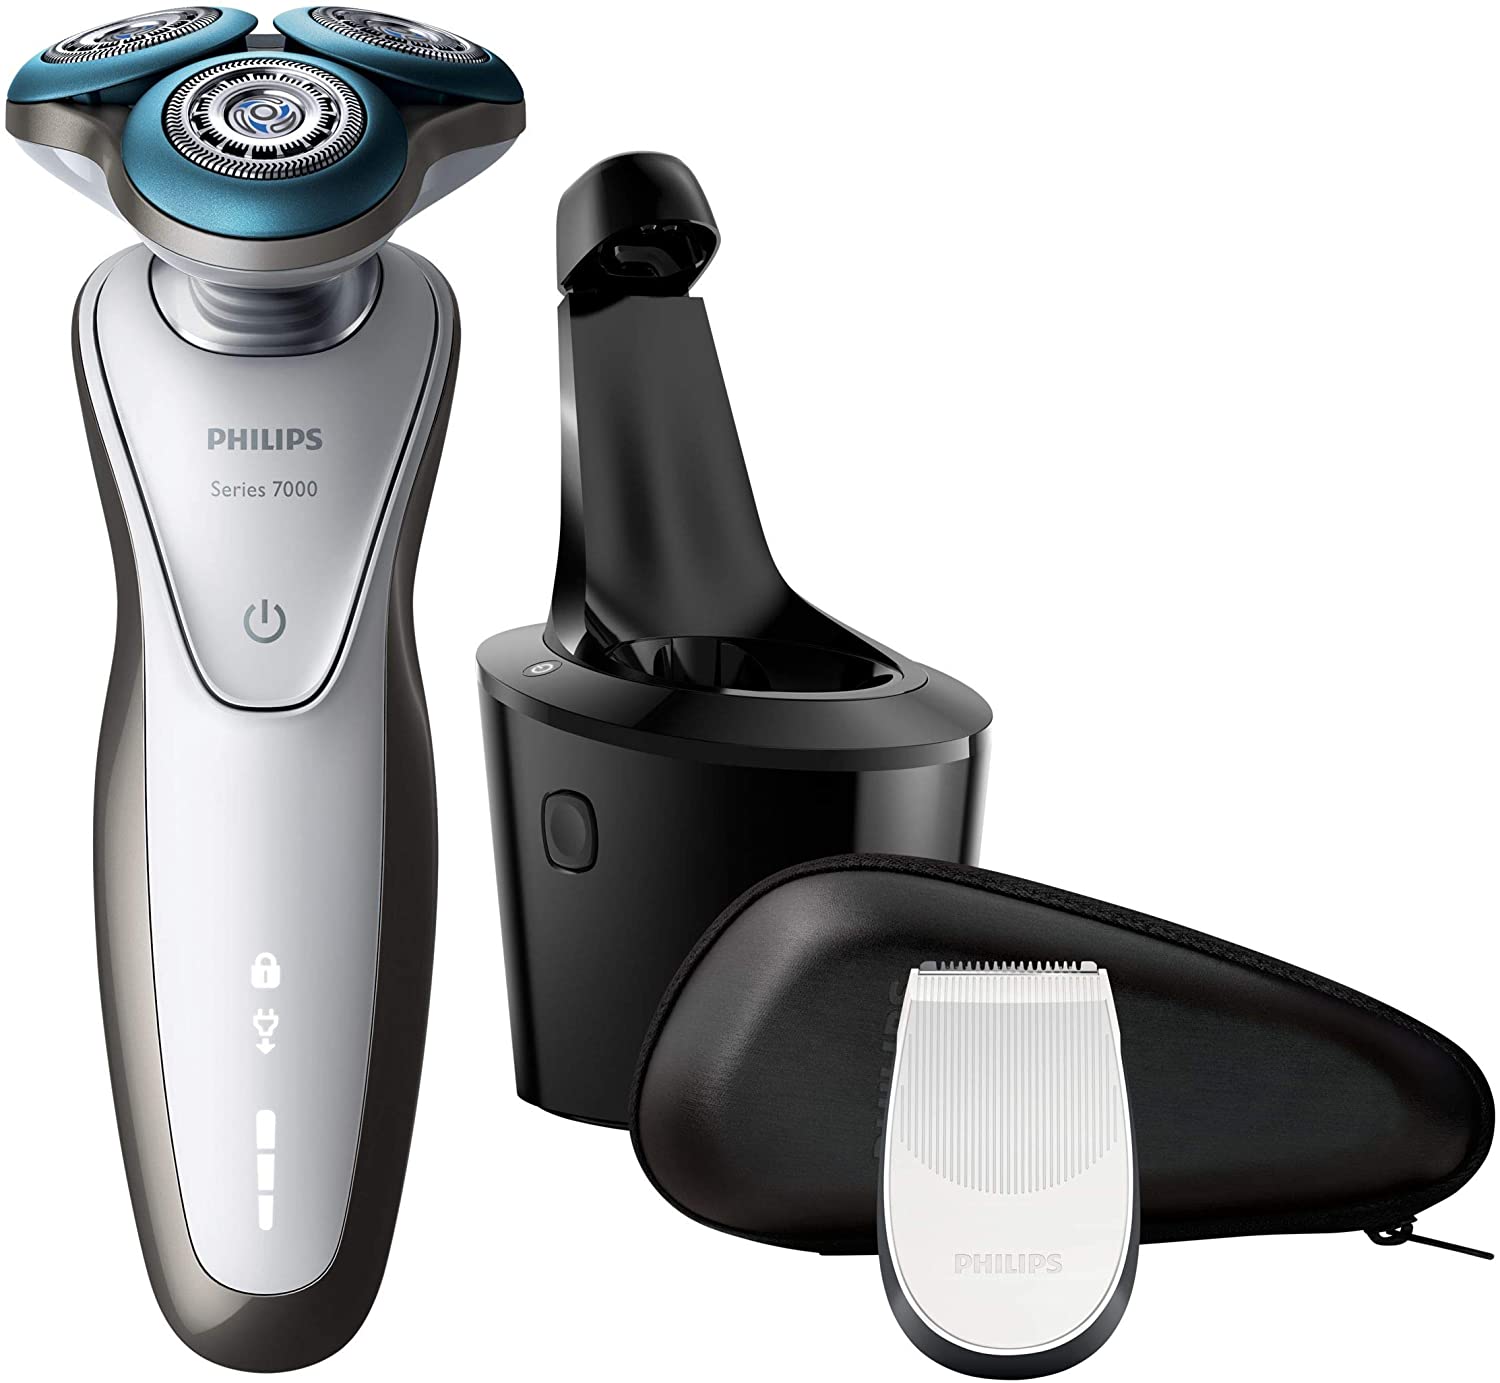 Philips Shaver 7700Wet & dry electric shaver, Series 7000